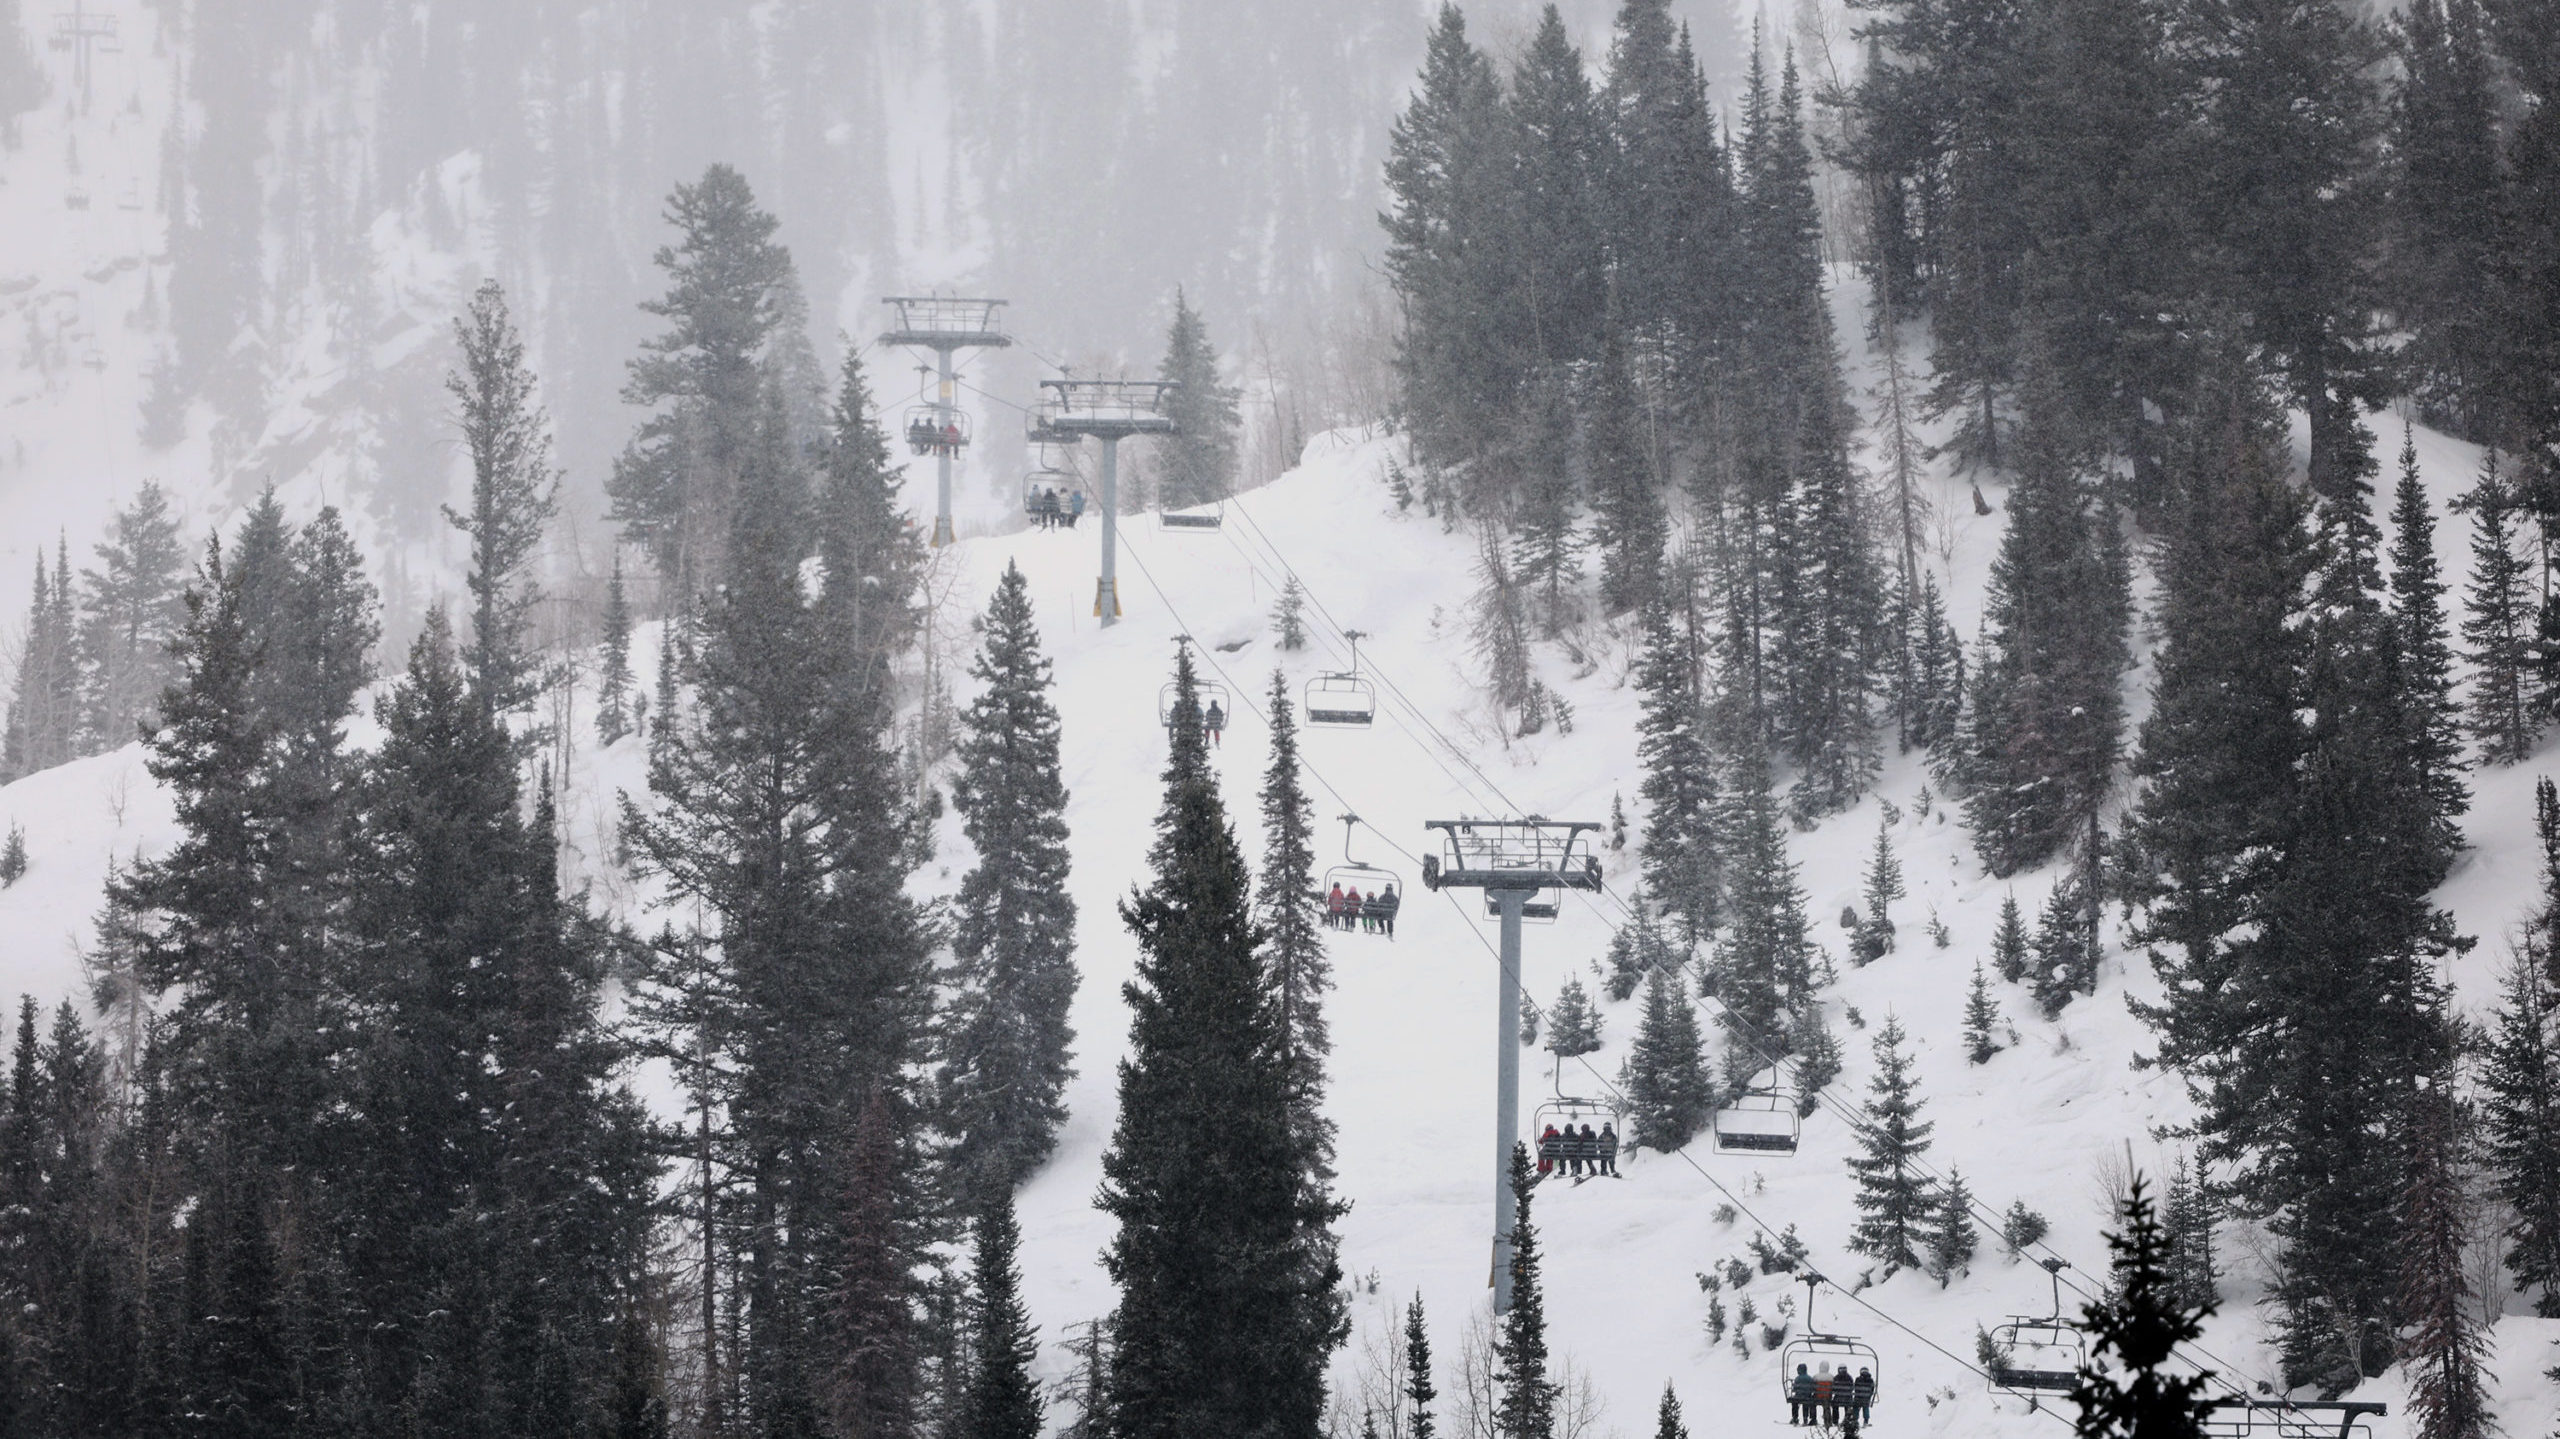 skiers on a ski lift travel over snowy mountains, utah weather calls for more snow...